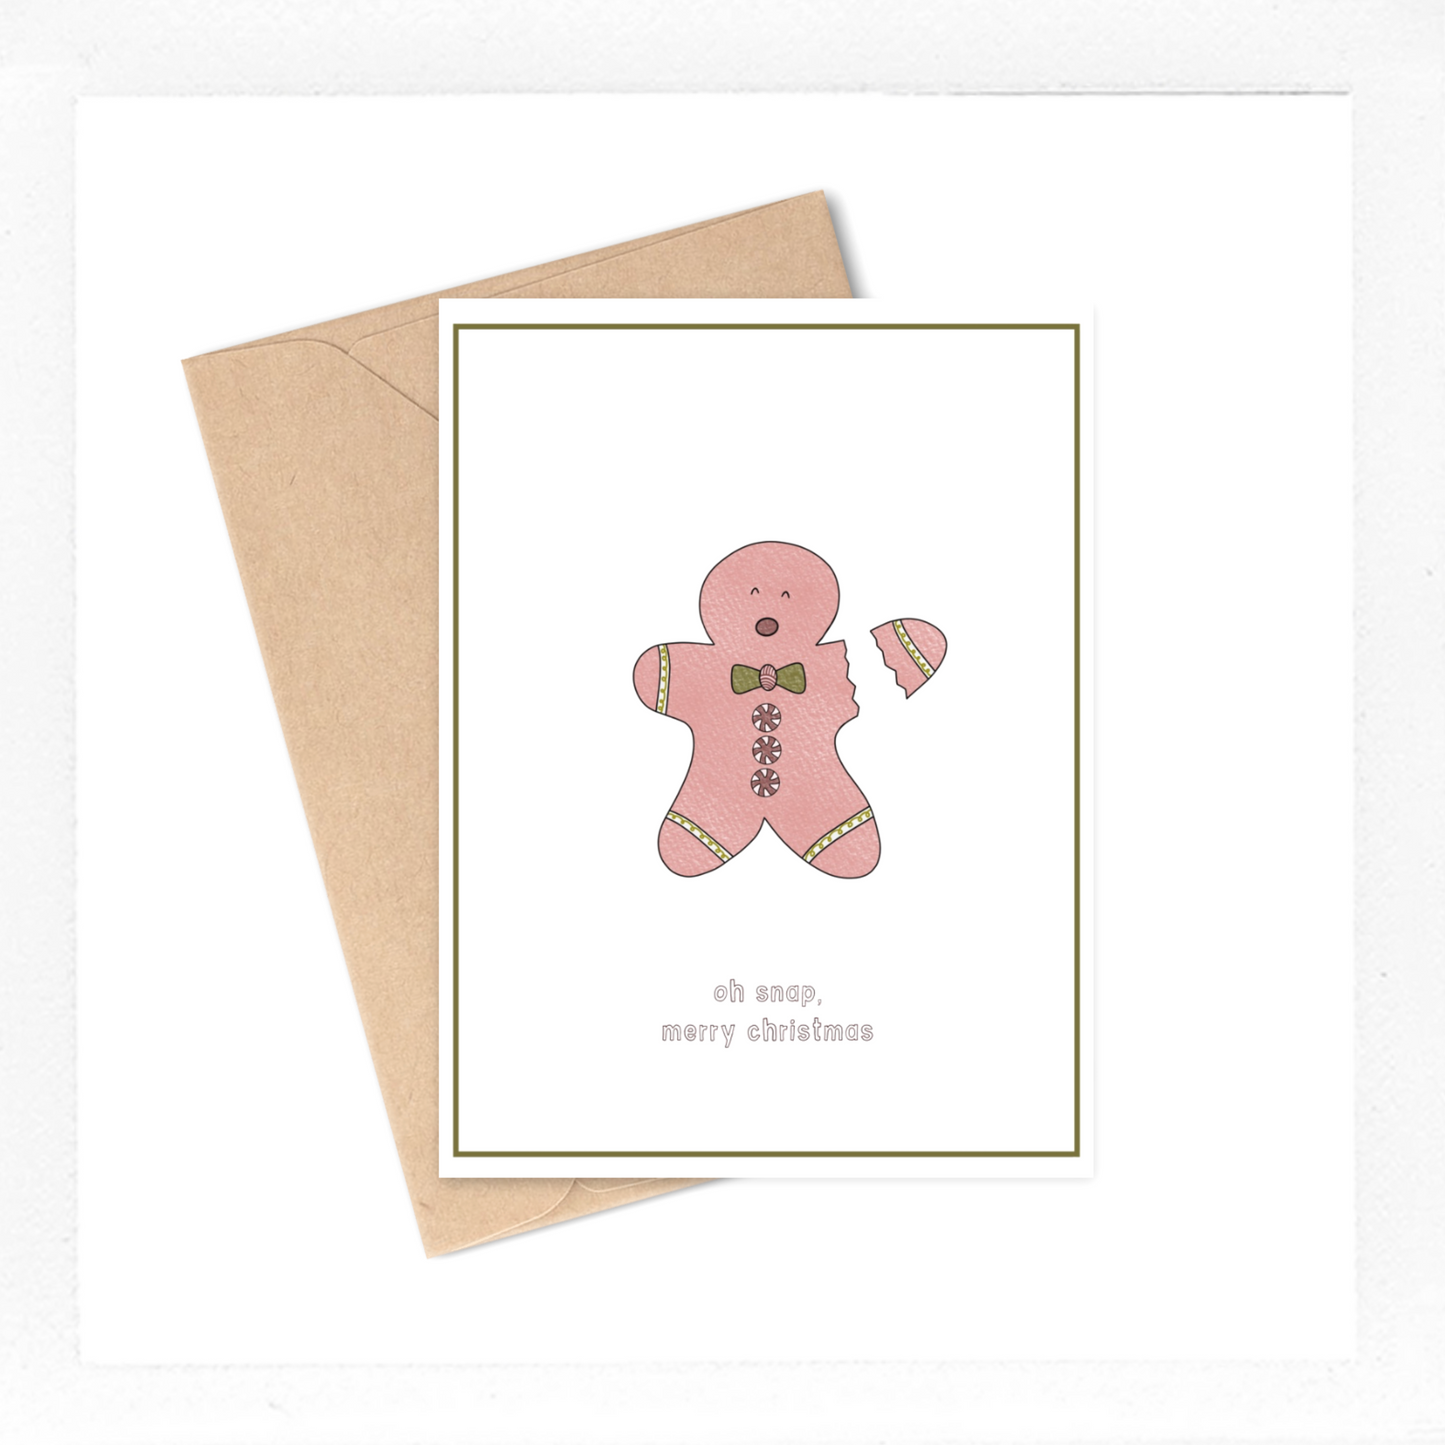 This card features a drawing of a gingerbread man with his arm snapped off (oh no!!!) with the text 'oh snap, merry christmas!"